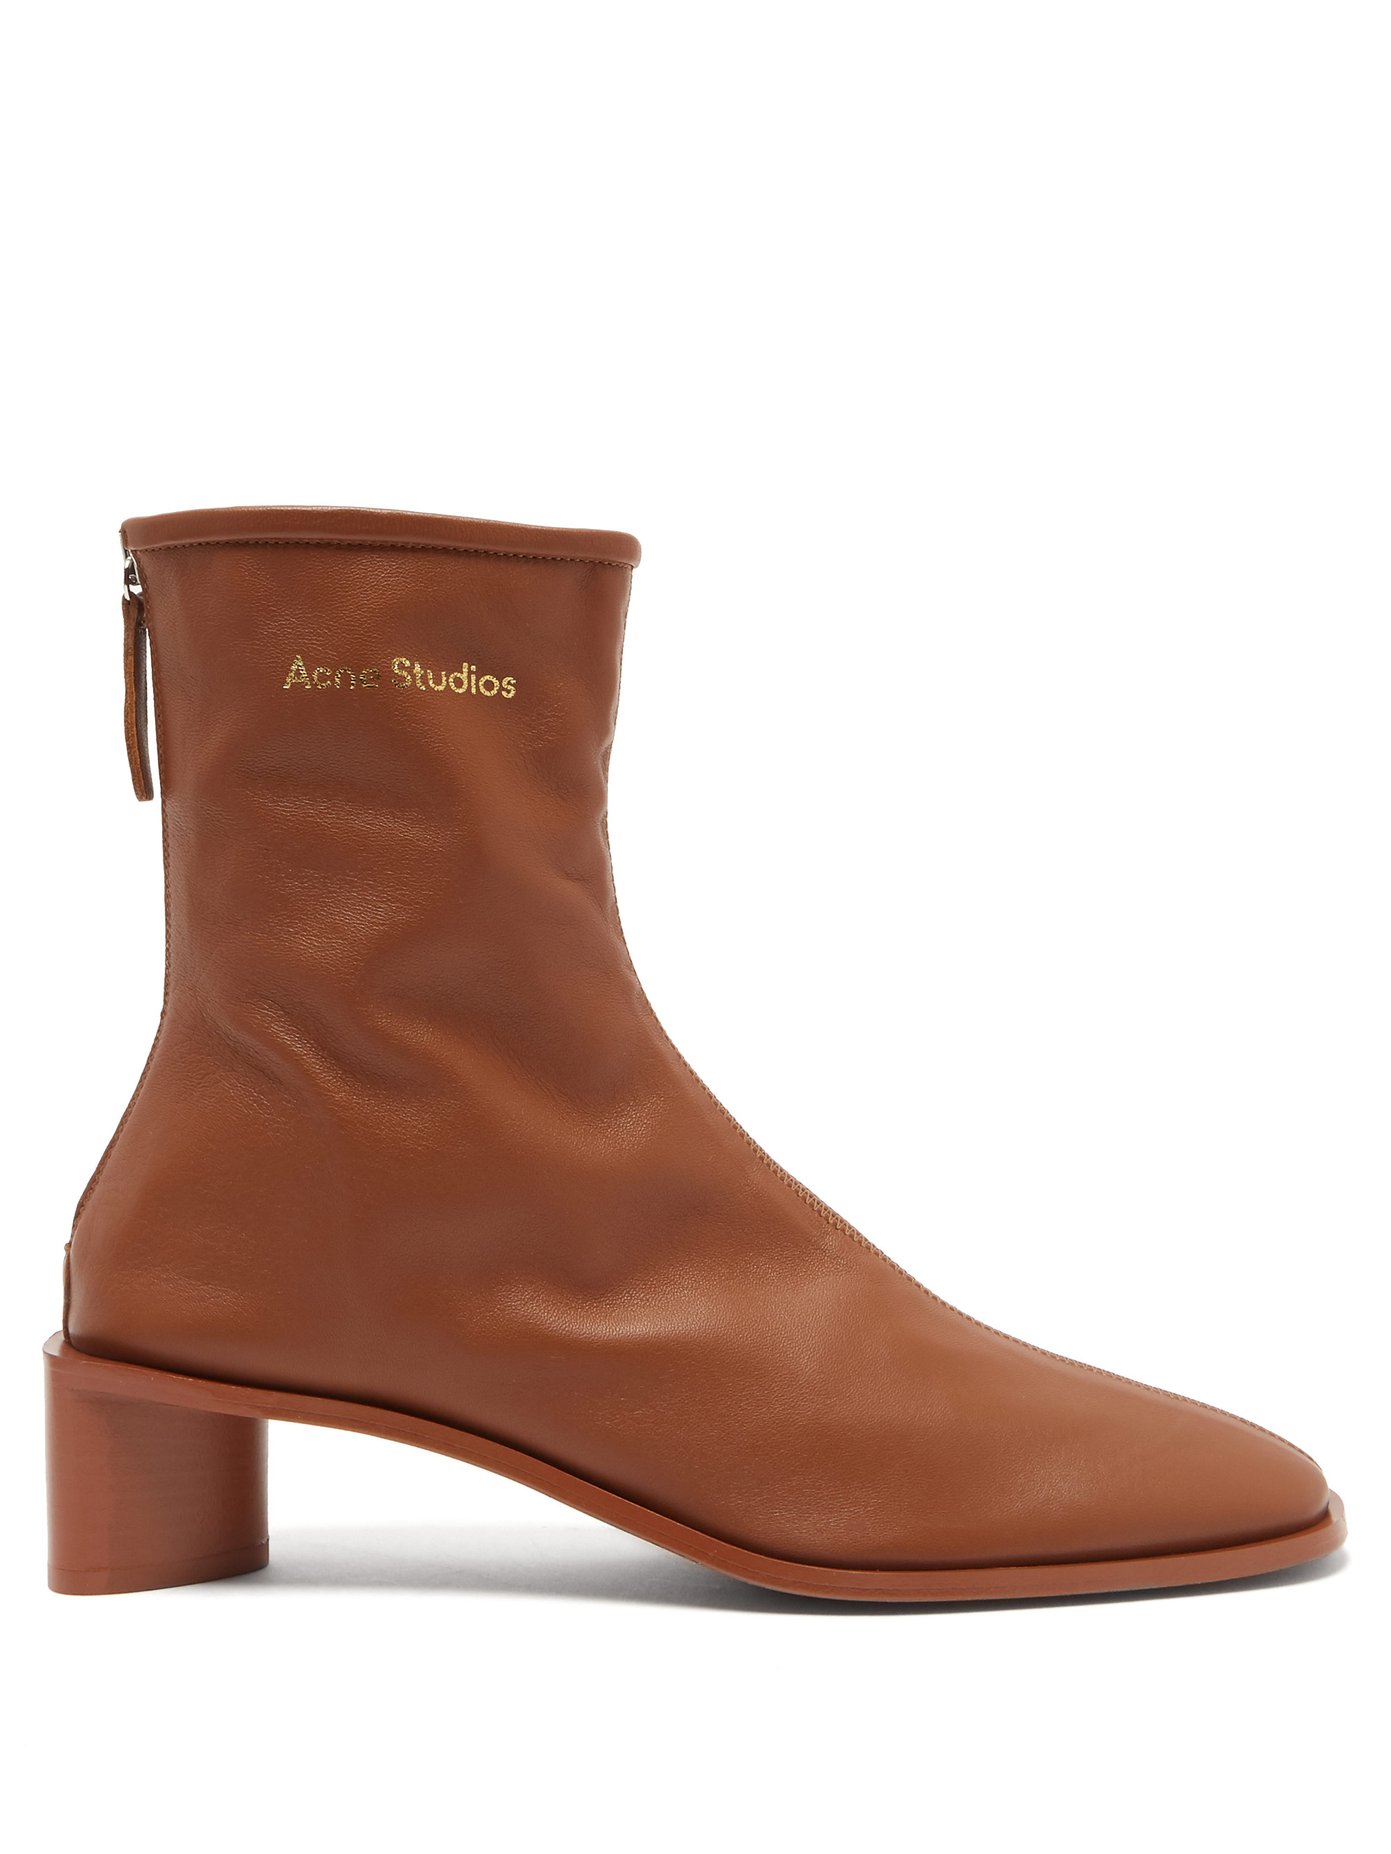 acne studios ankle boots